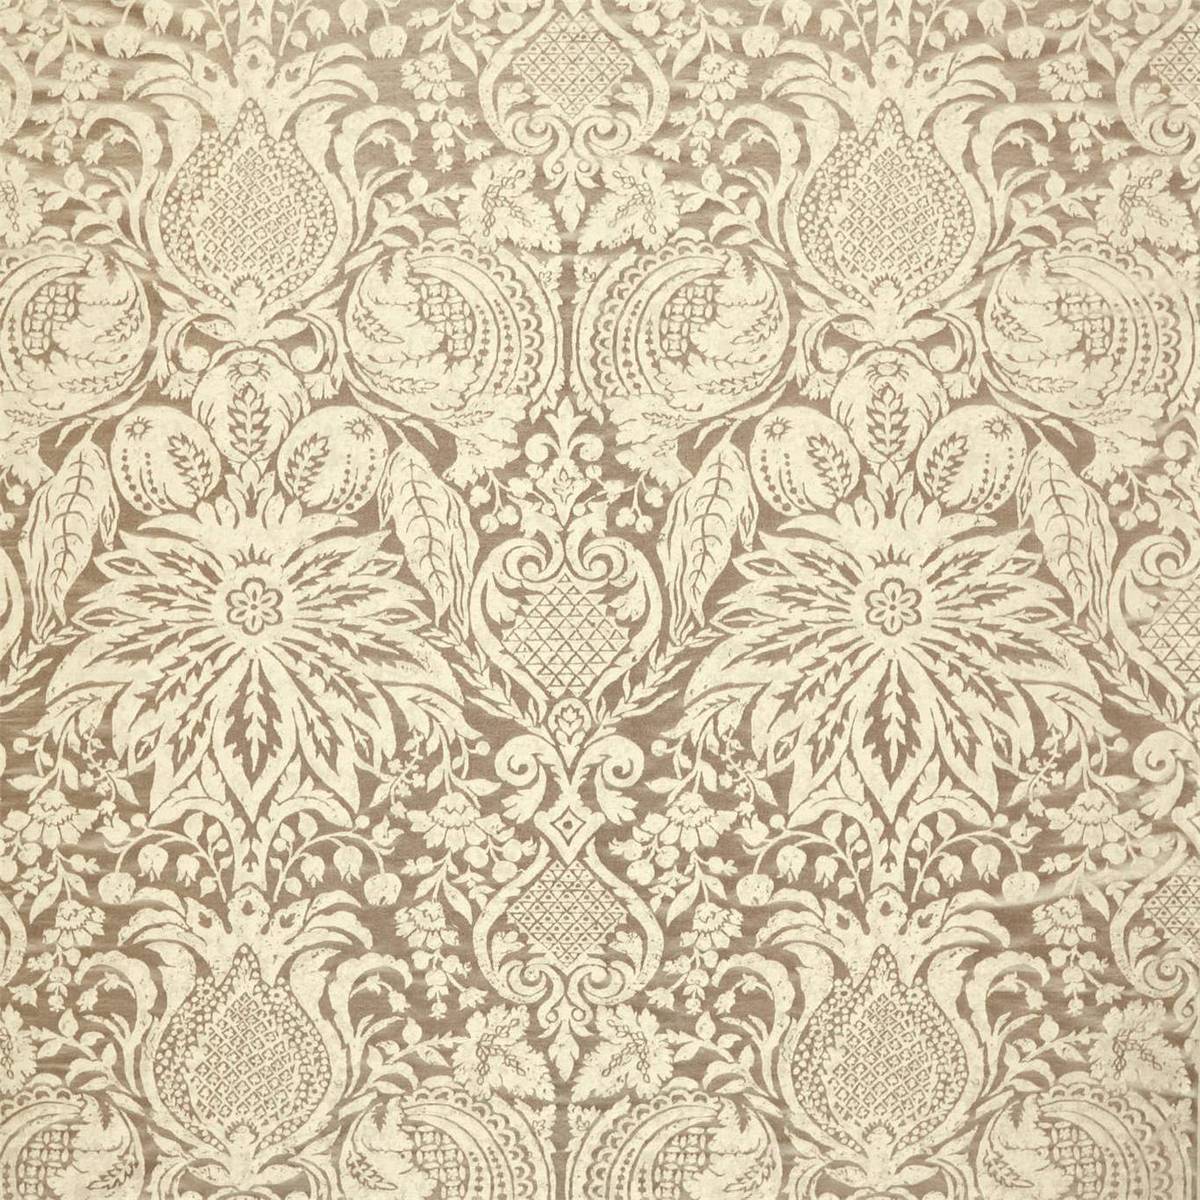 Mitford Weave Fossil Fabric by Zoffany